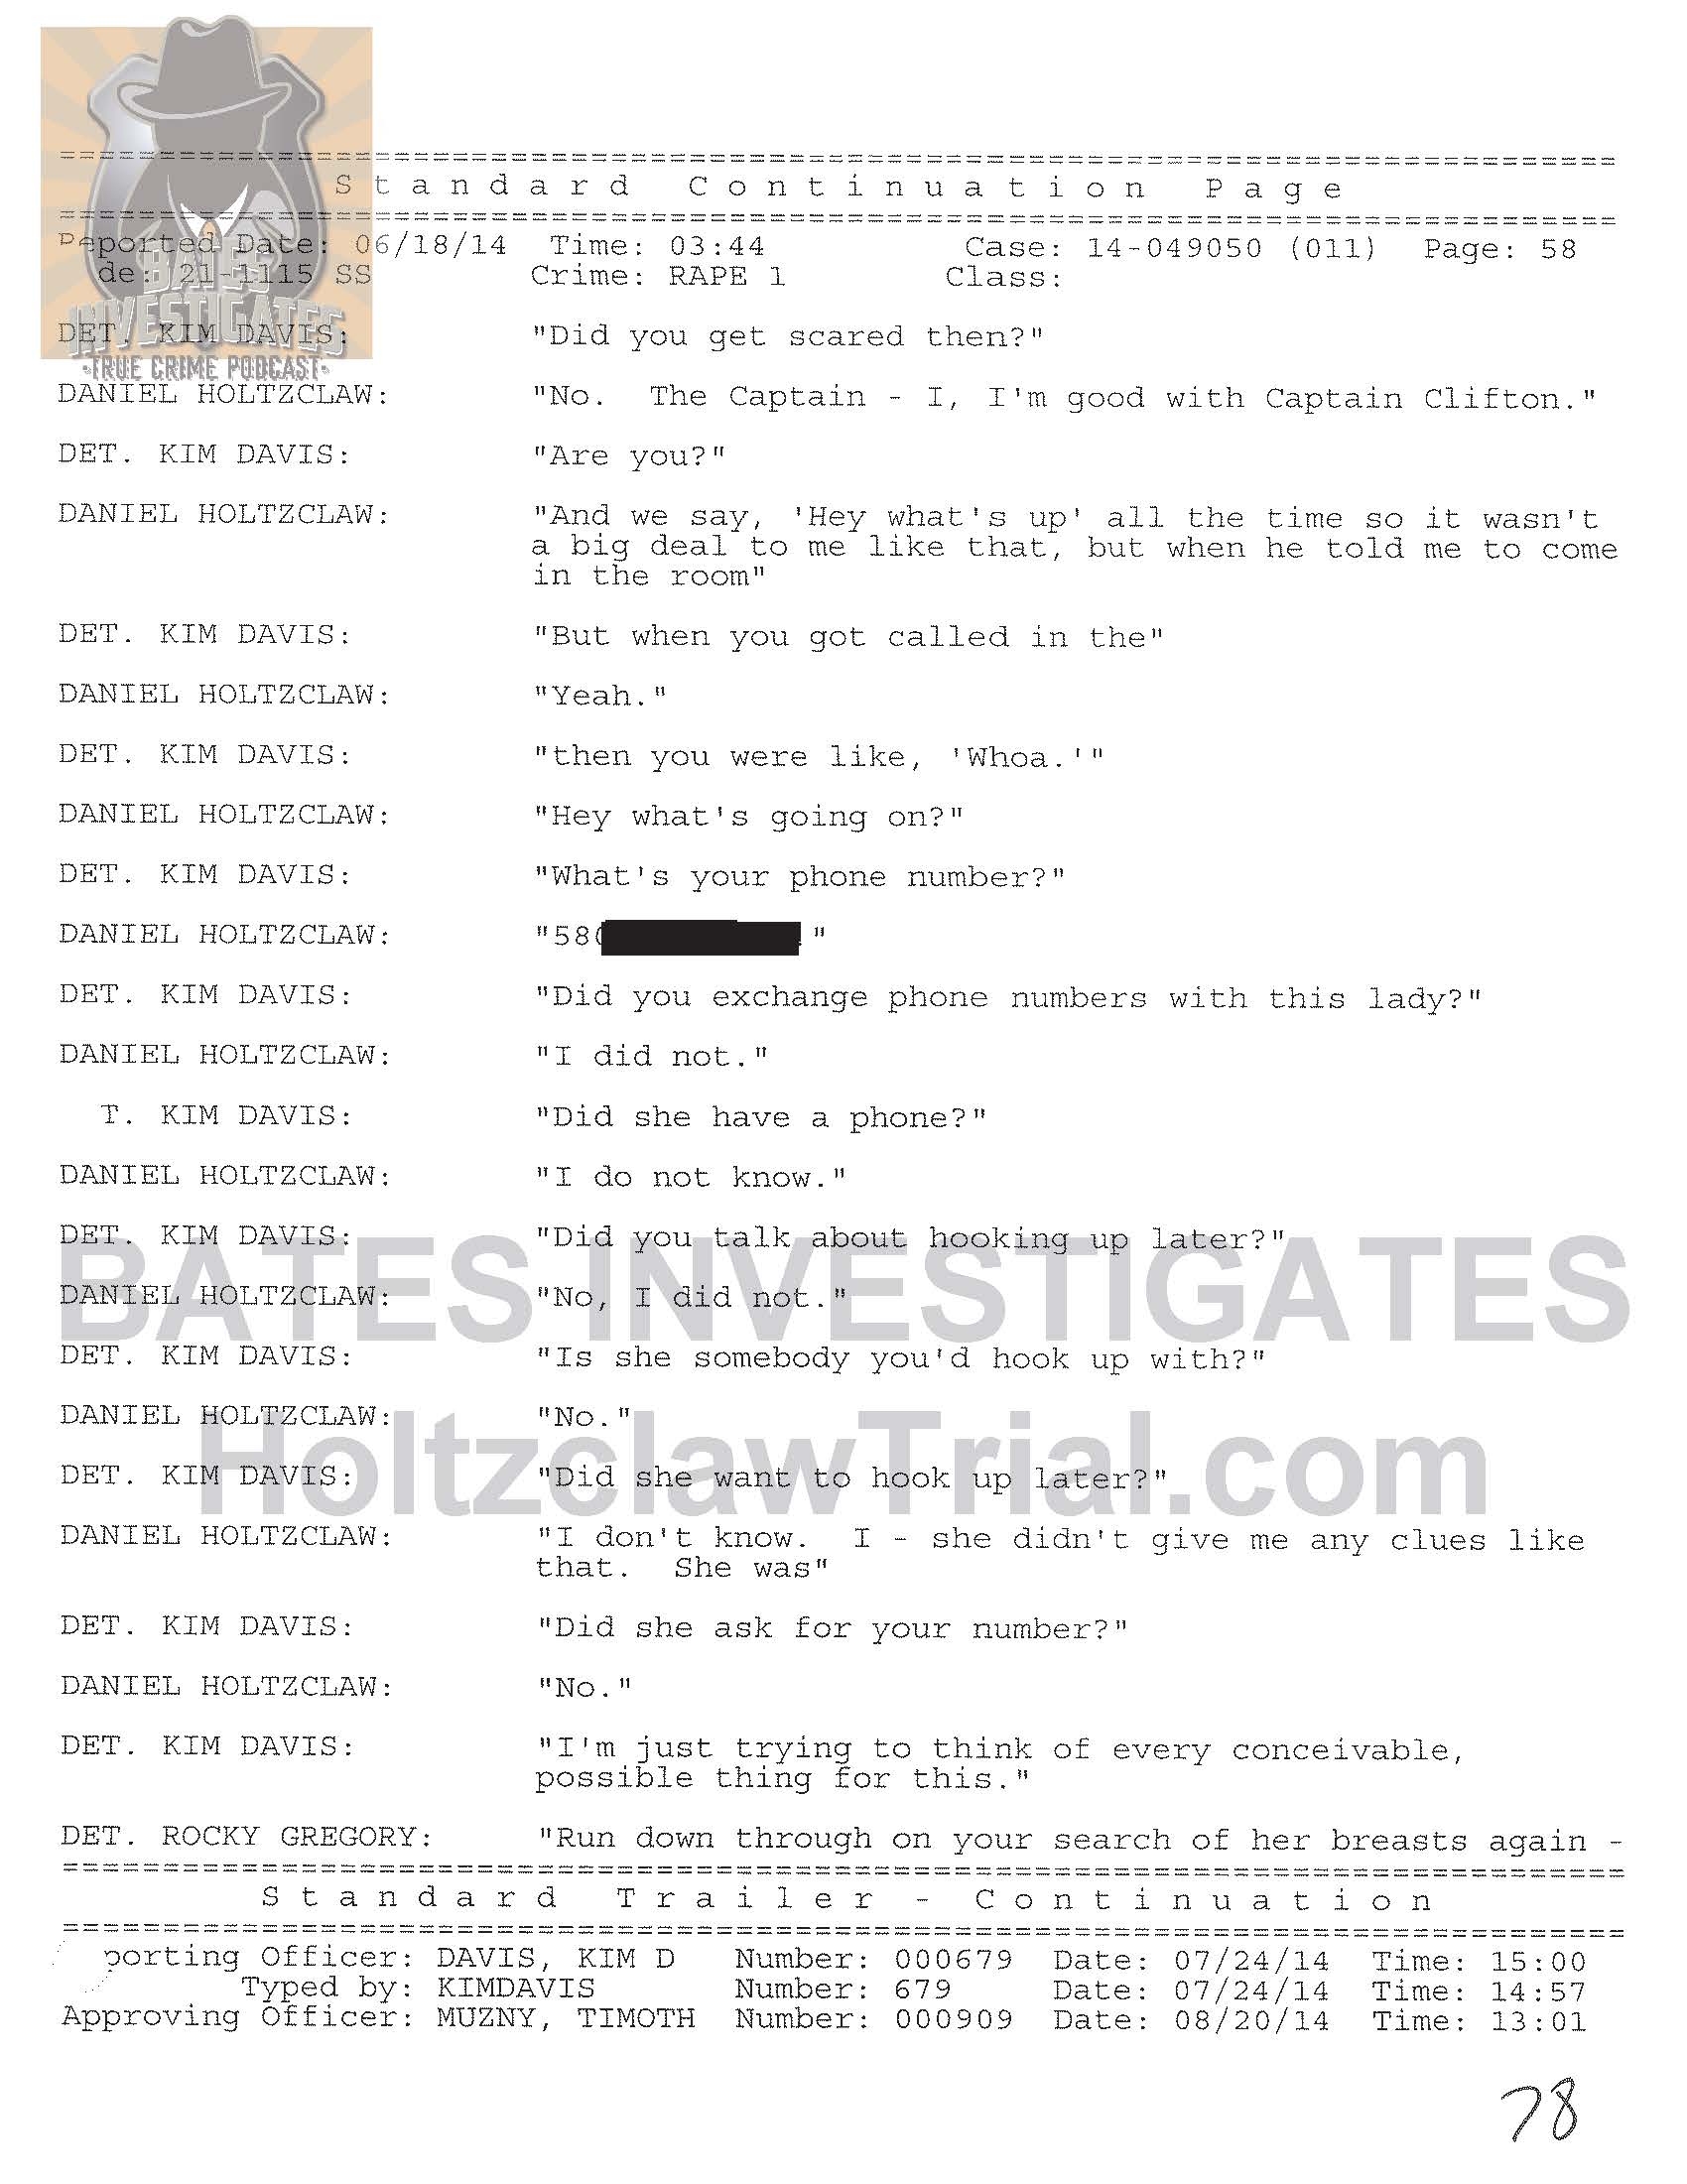 Holtzclaw Interrogation Transcript - Ep02 Redacted_Page_58.jpg